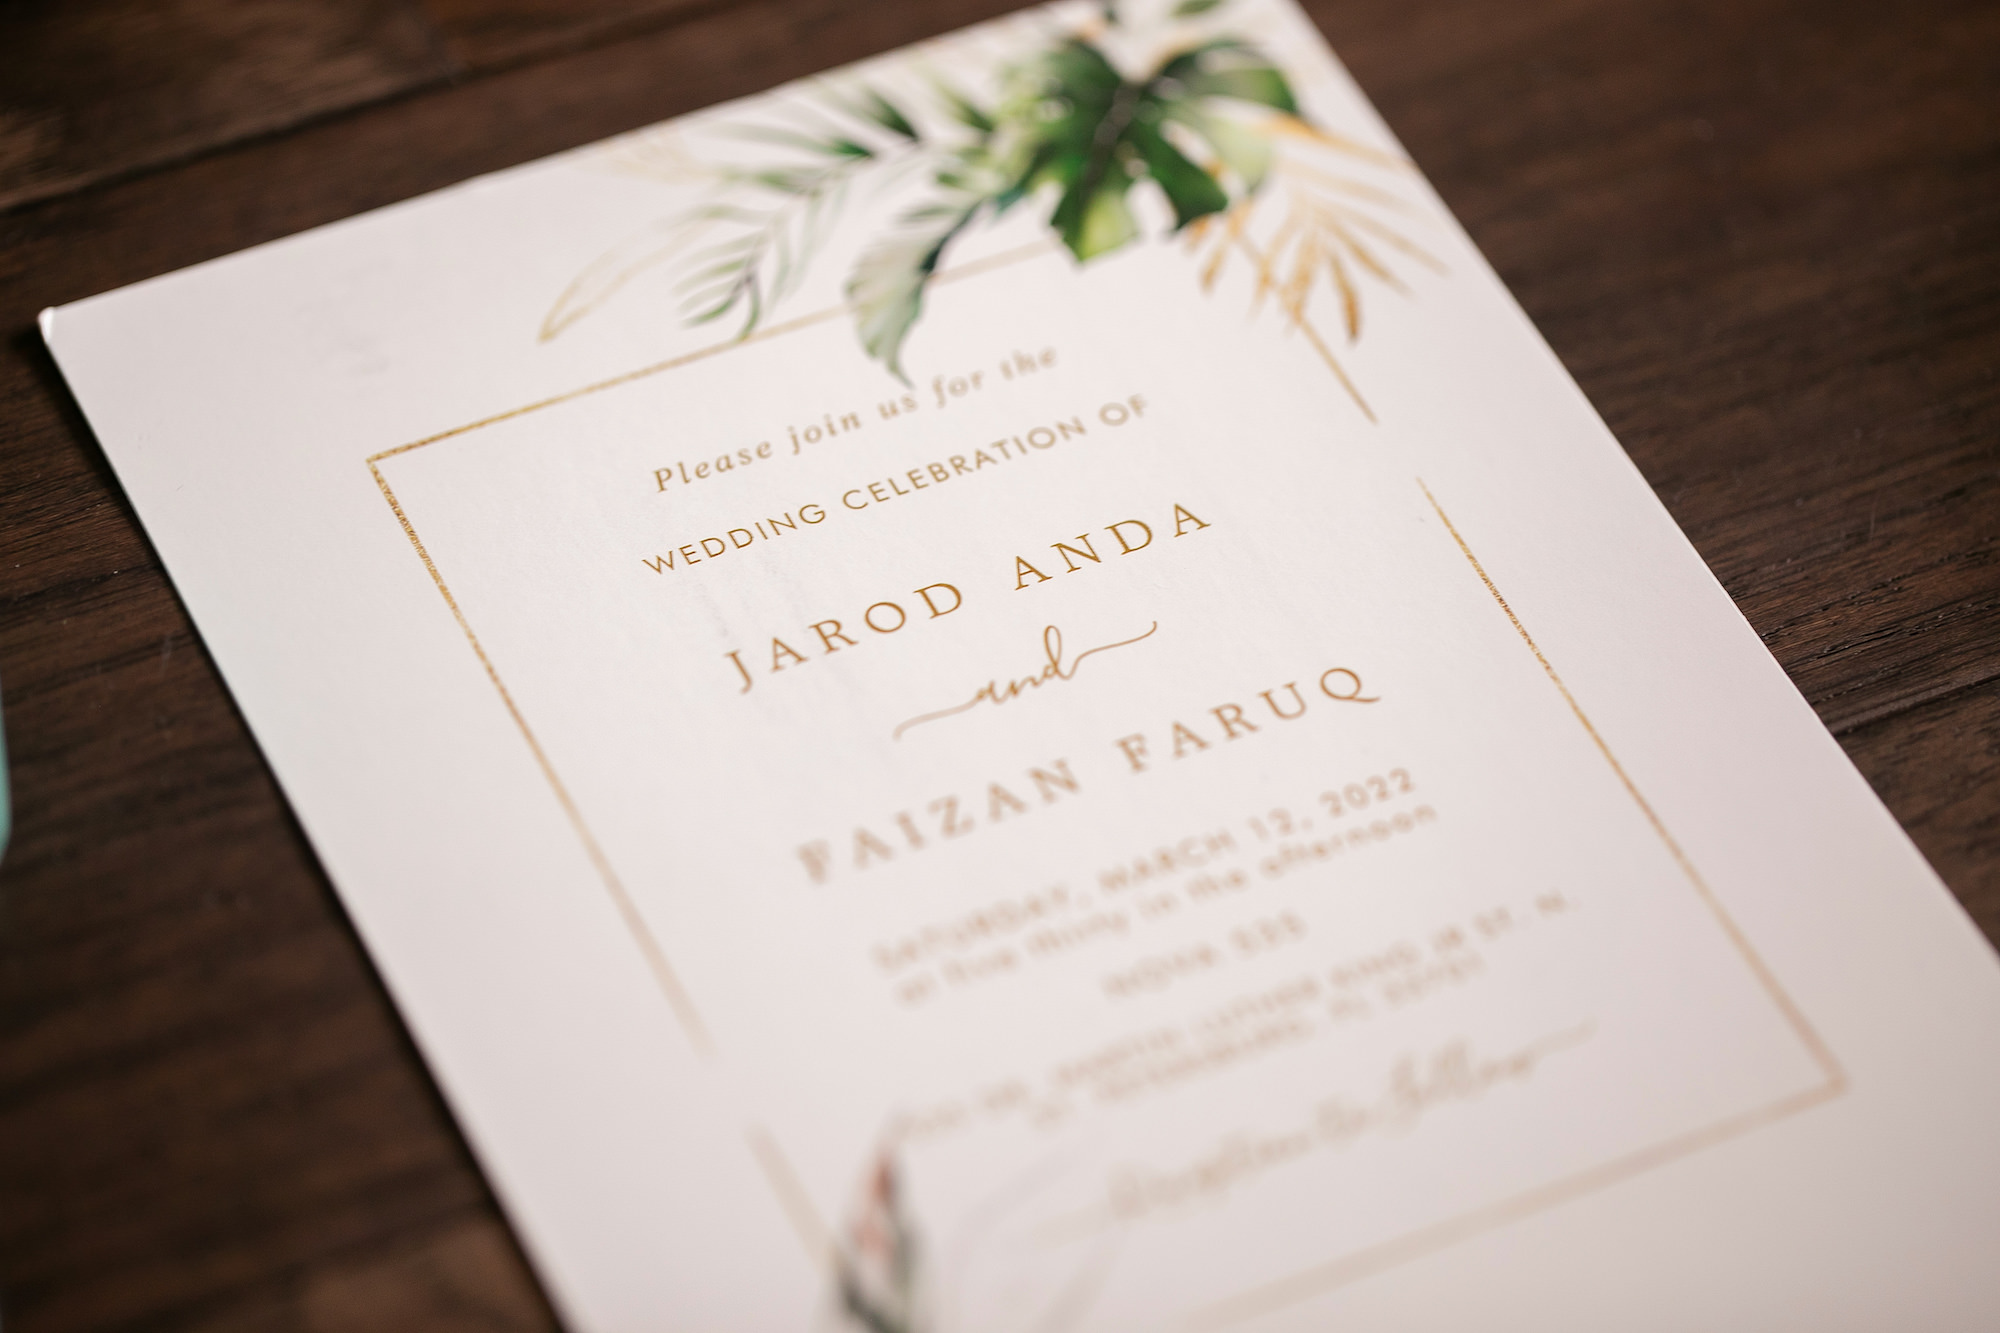 Tropical Inspired Wedding Invitations with Greenery, Gold Lettering and Gold Monster Leaves | Tampa Wedding Photographer Kristen Marie Photography